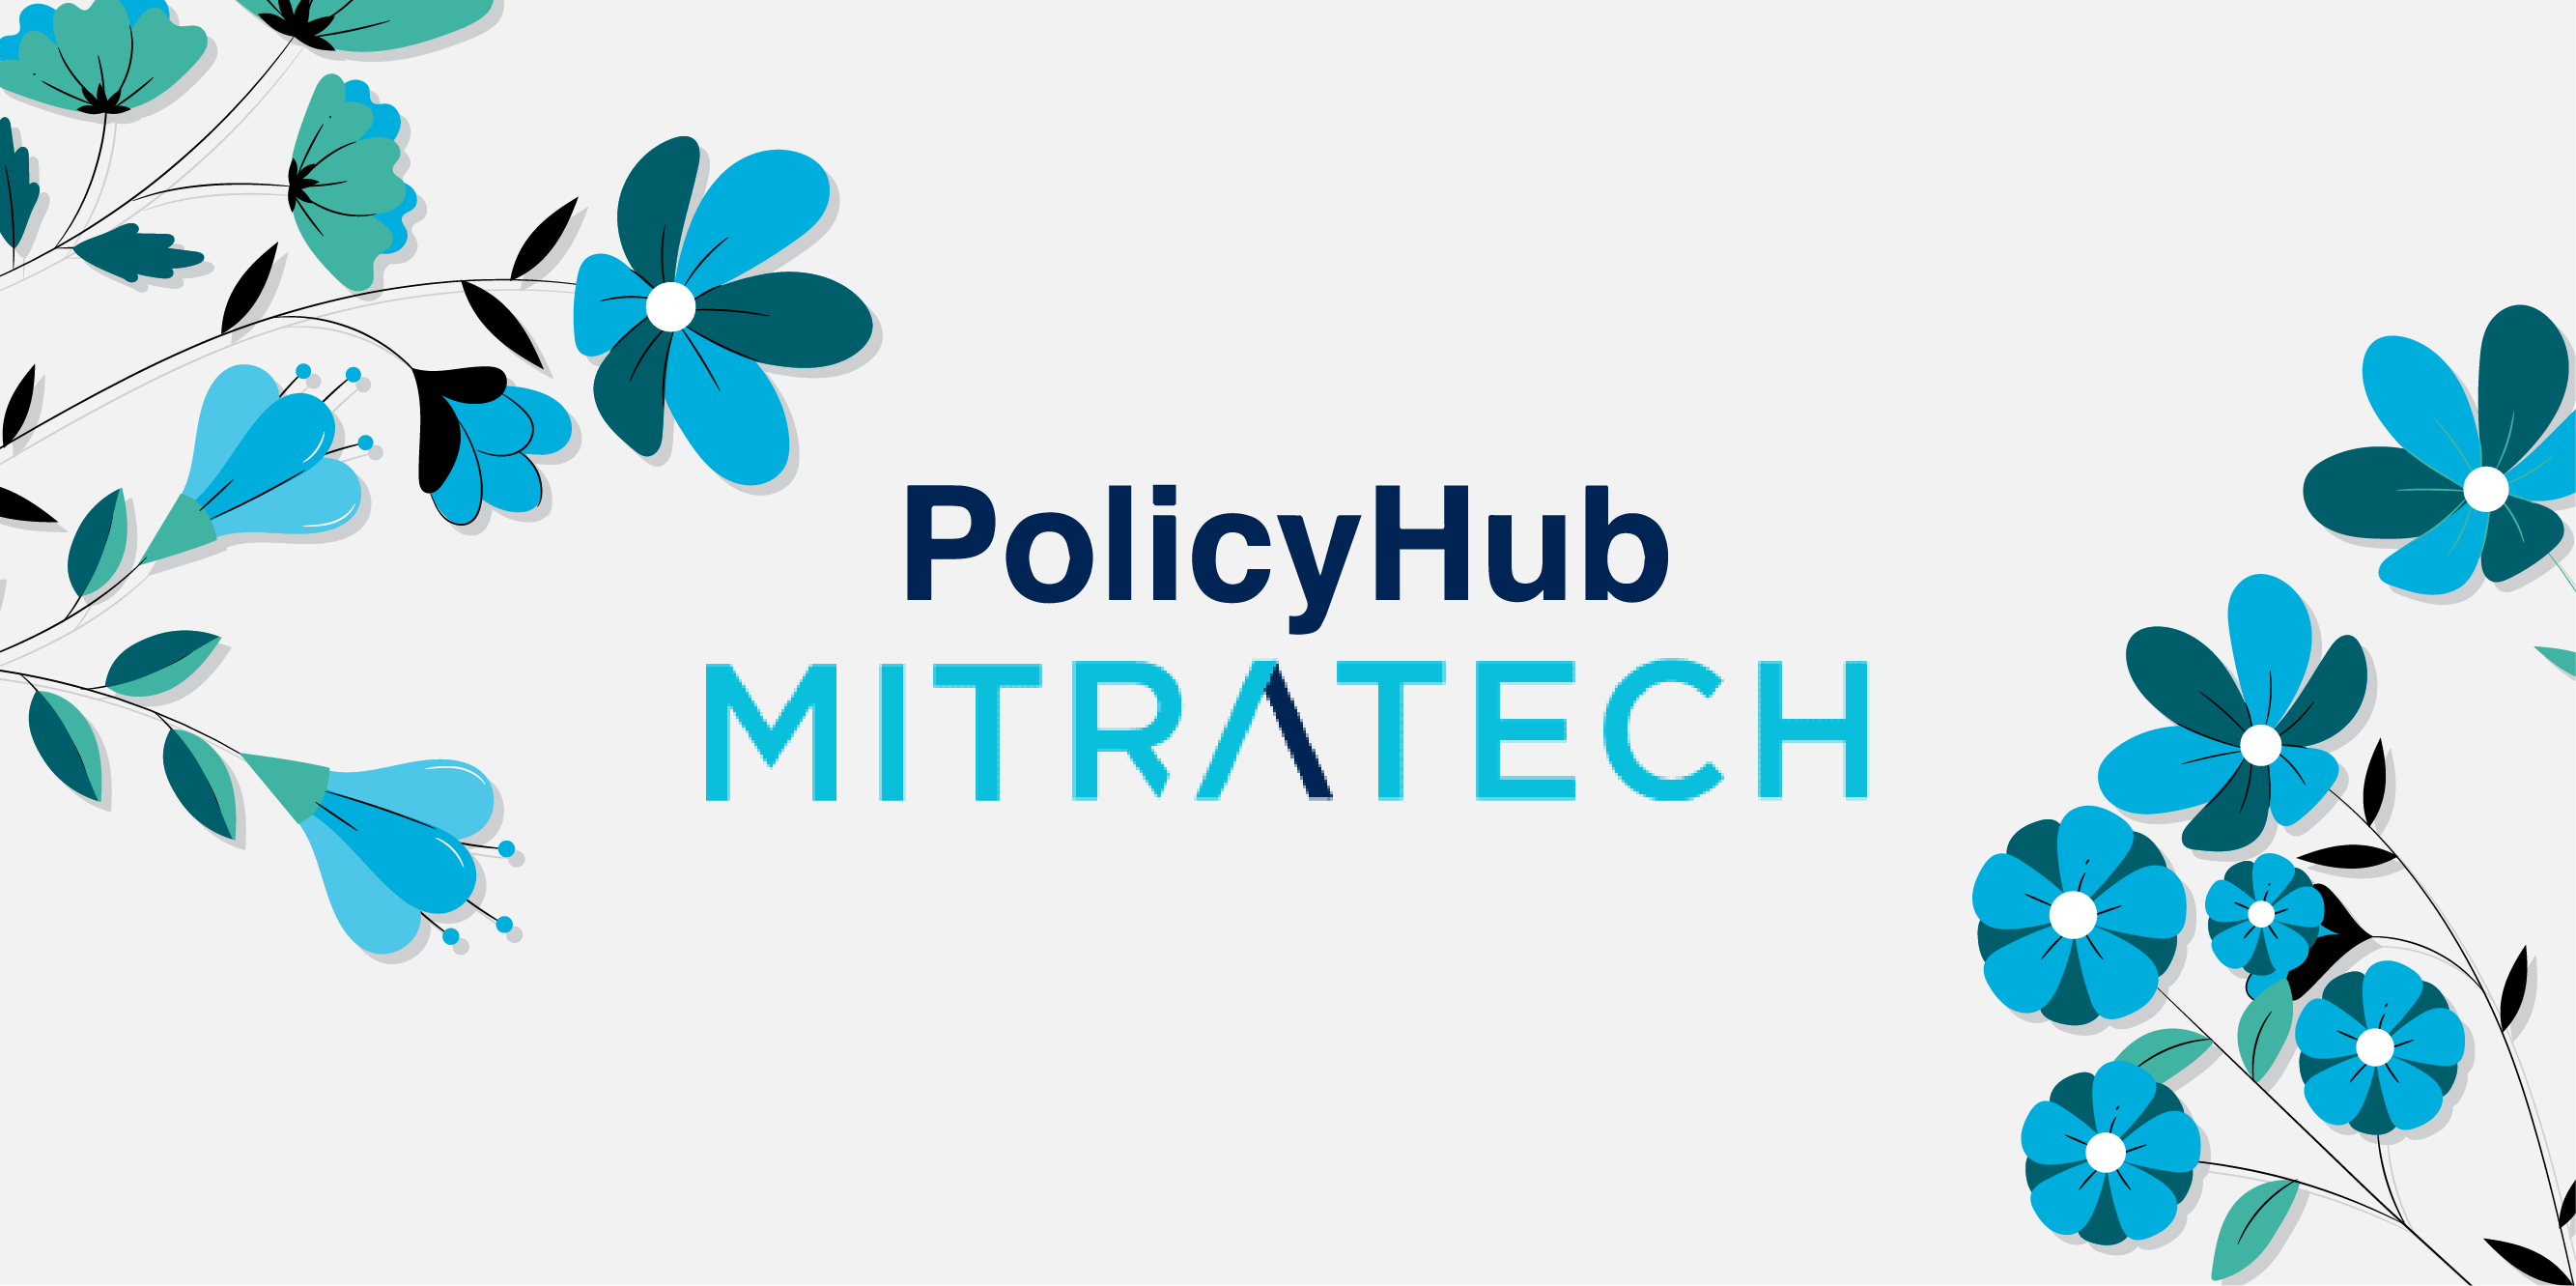 PolicyHub by Mitratech